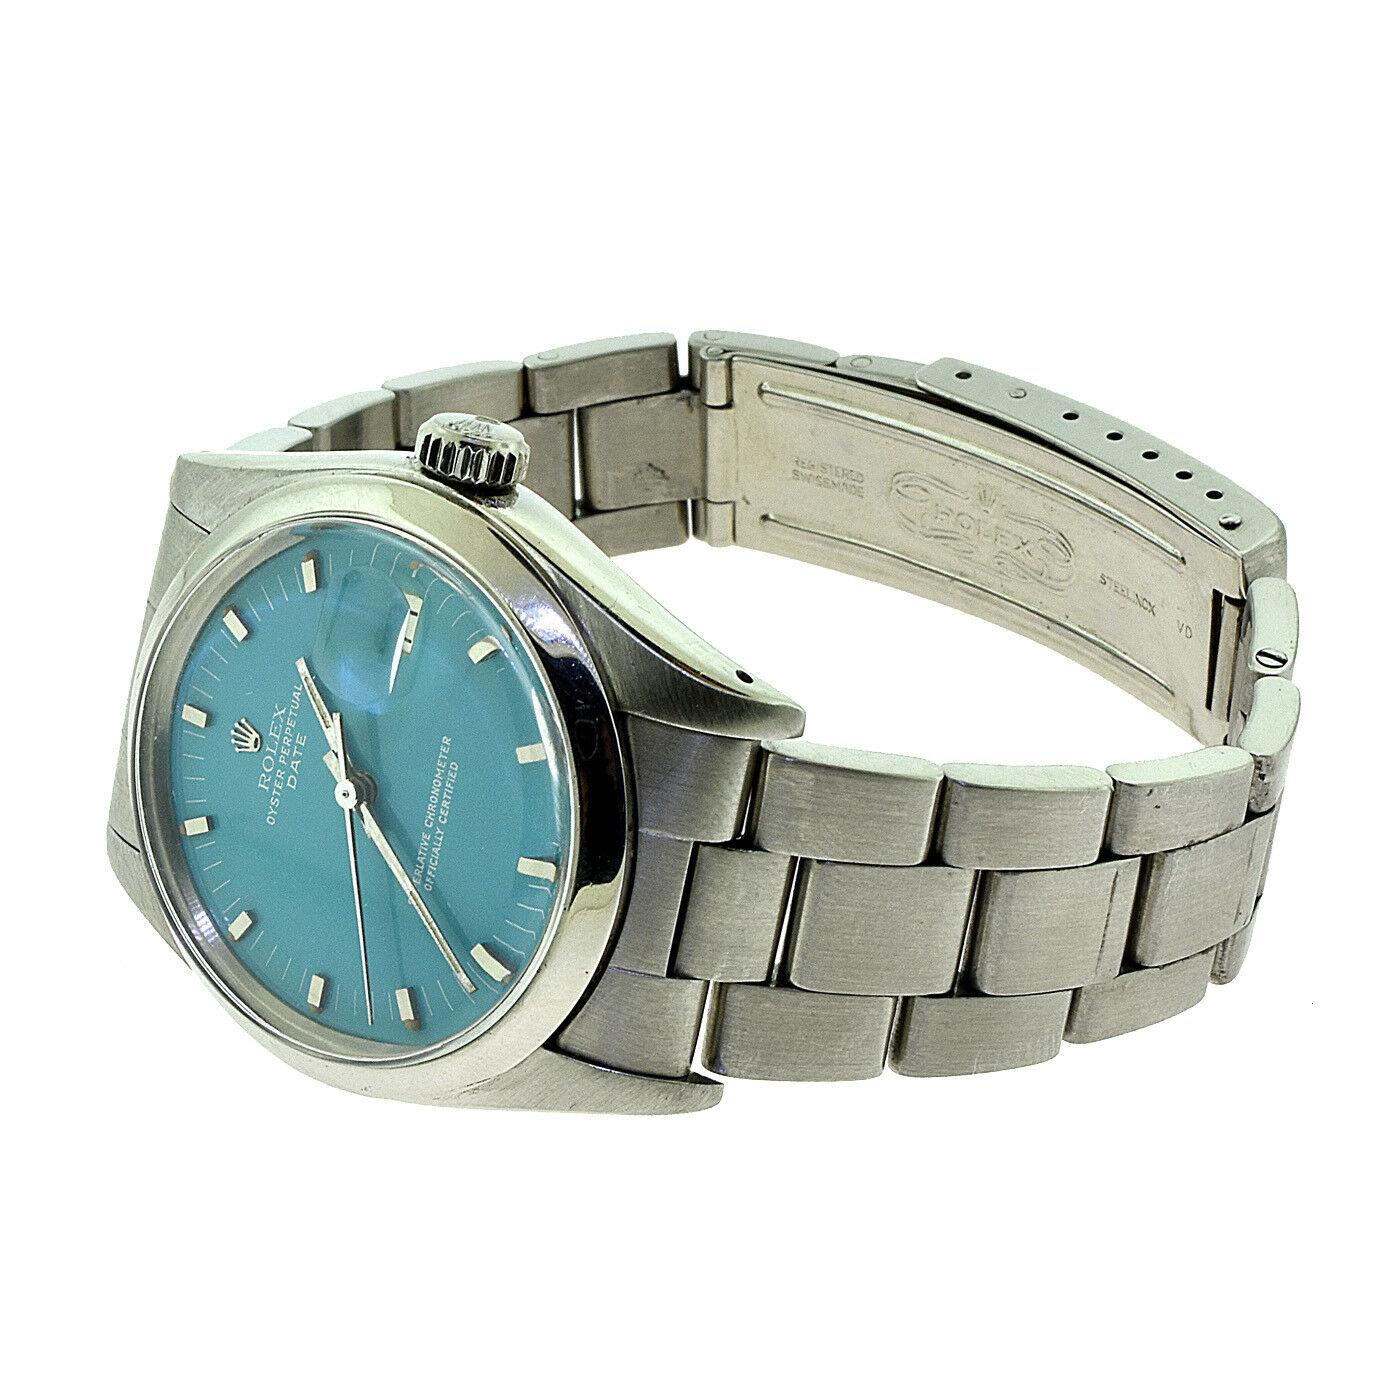 Brilliance Jewels, Miami
Questions? Call Us Anytime!
786,482,8100

Brand: Rolex

Model Name: Date

Model Number: 1500

Movement: Automatic

Jewels: 26 Jewels 

Case Size: 34 mm 

Case Material: Stainless Steel

Dial Color: Turquoise

Hour Markers: